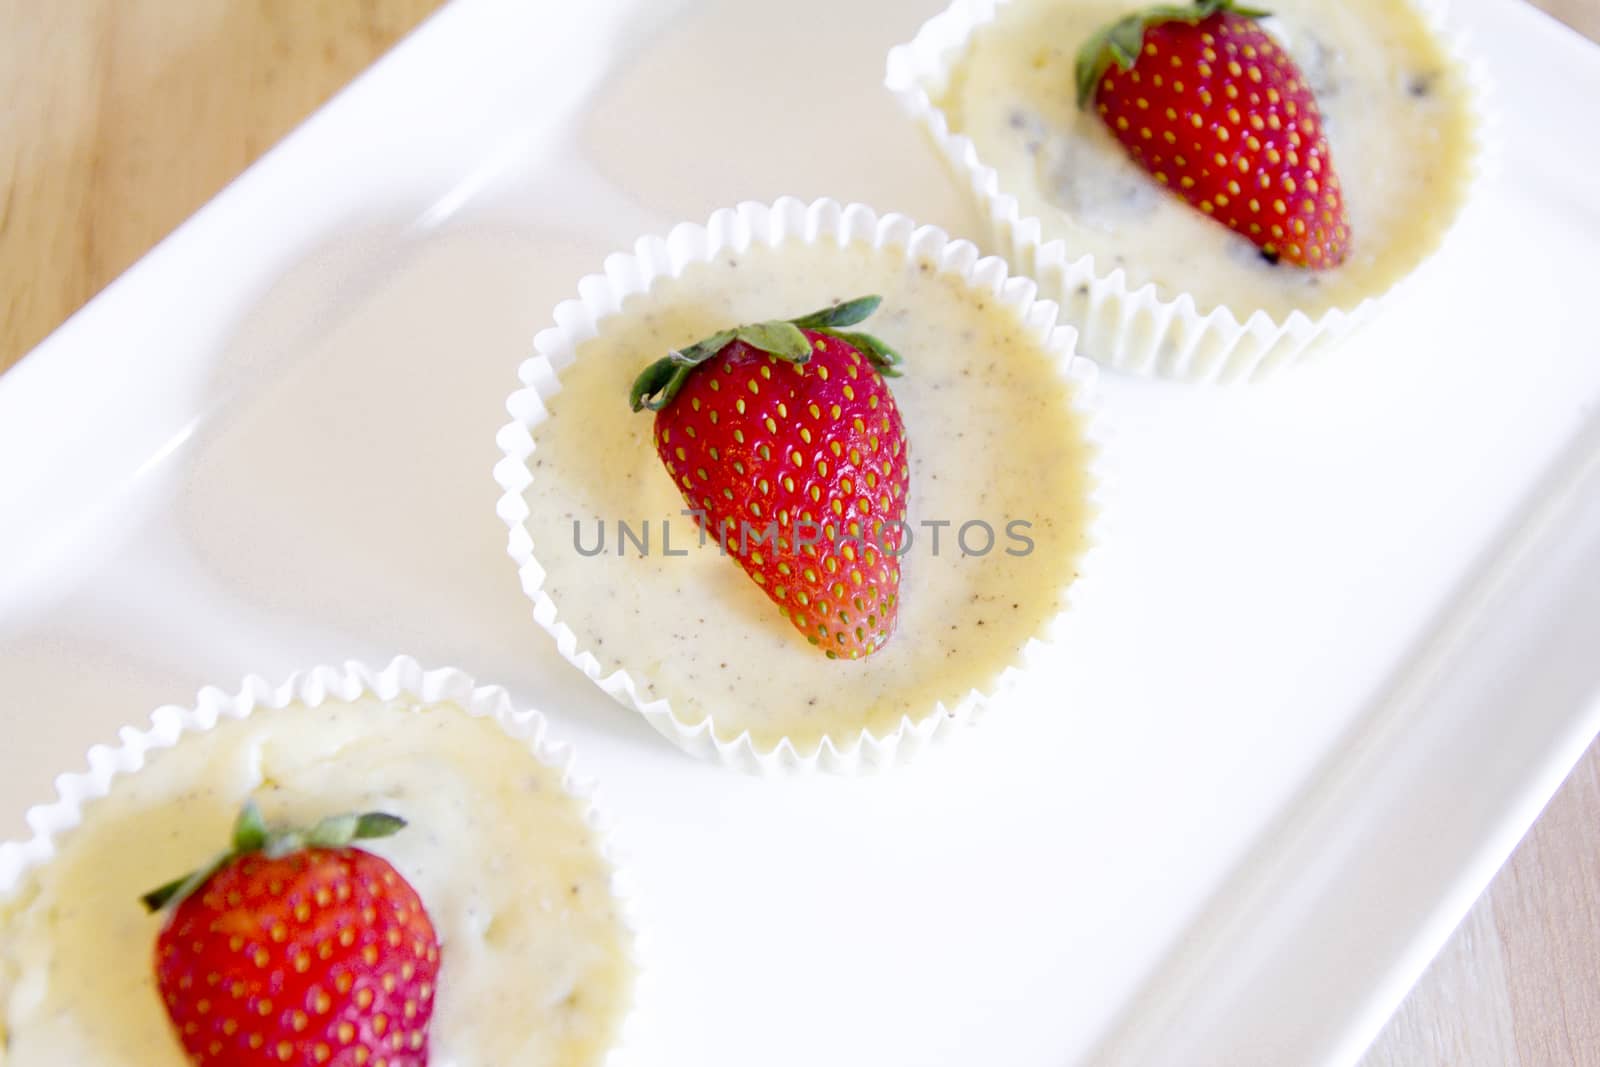 sweet cake with Strawberry on top in a cup